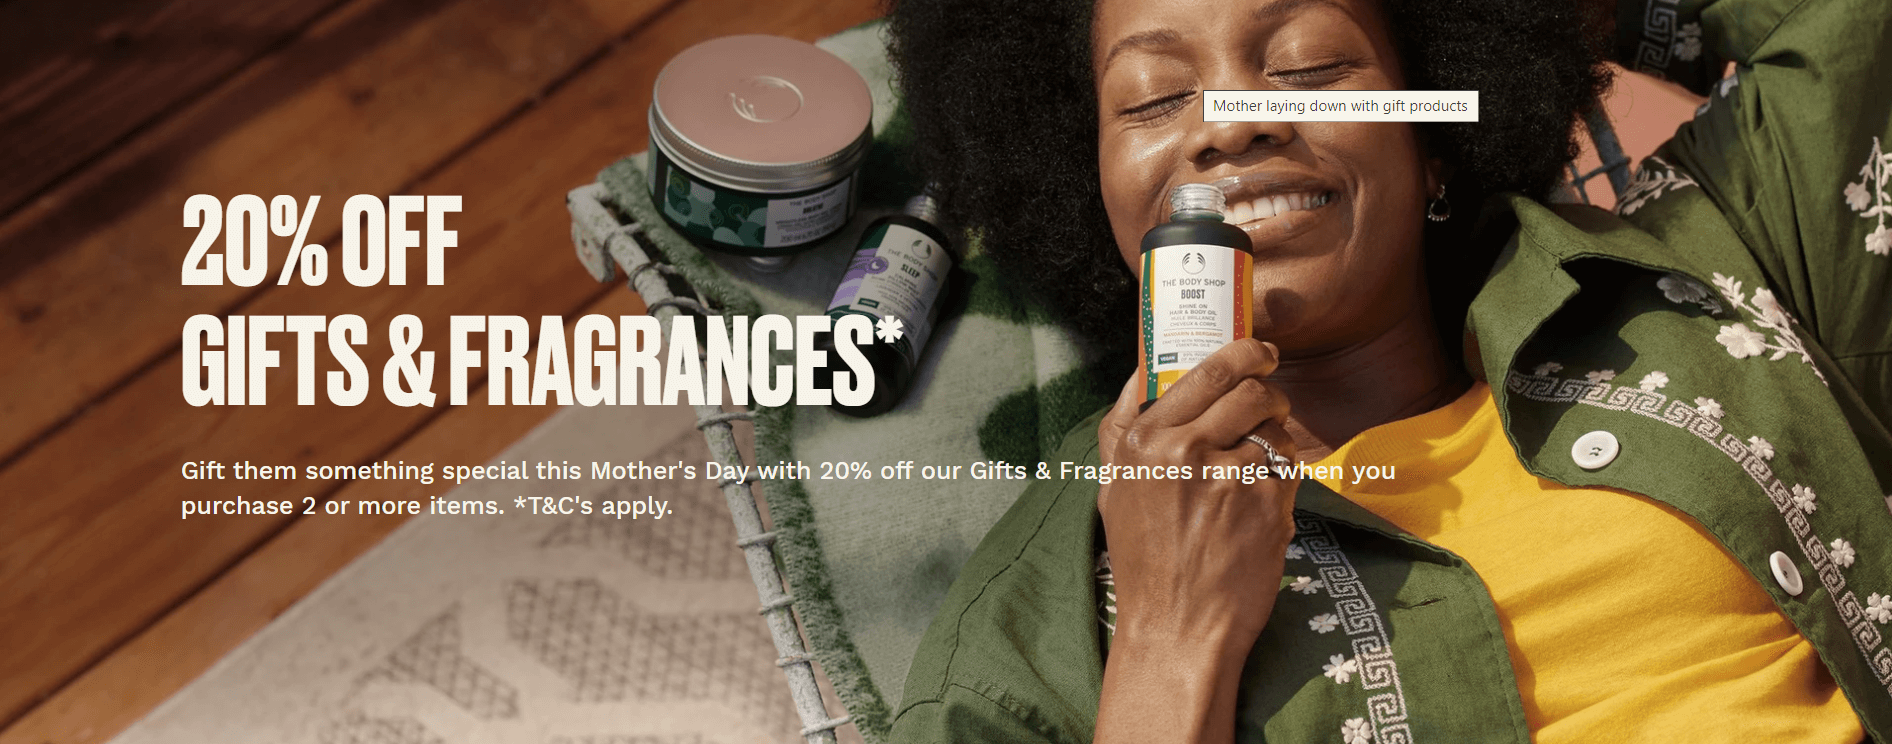 20% OFF
GIFTS & FRAGRANCES*